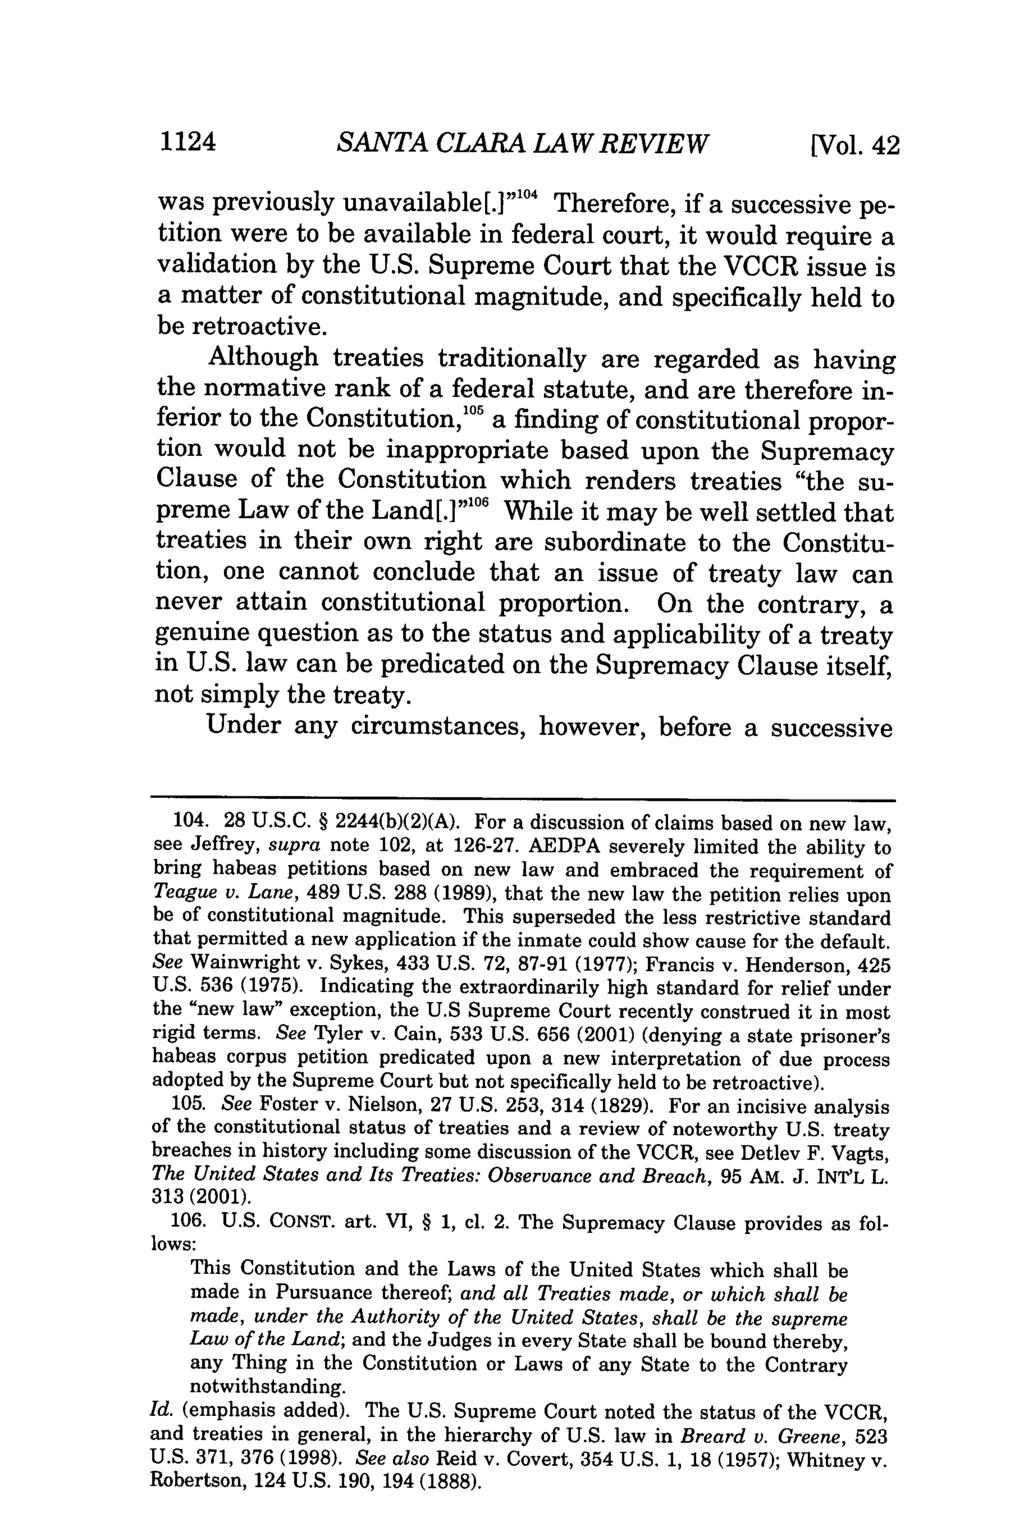 1124 SANTA CLARA LAW REVIEW [Vol. 42 was previously unavailable[.]1 " Therefore, if a successive petition were to be available in federal court, it would require a validation by the U.S. Supreme Court that the VCCR issue is a matter of constitutional magnitude, and specifically held to be retroactive.